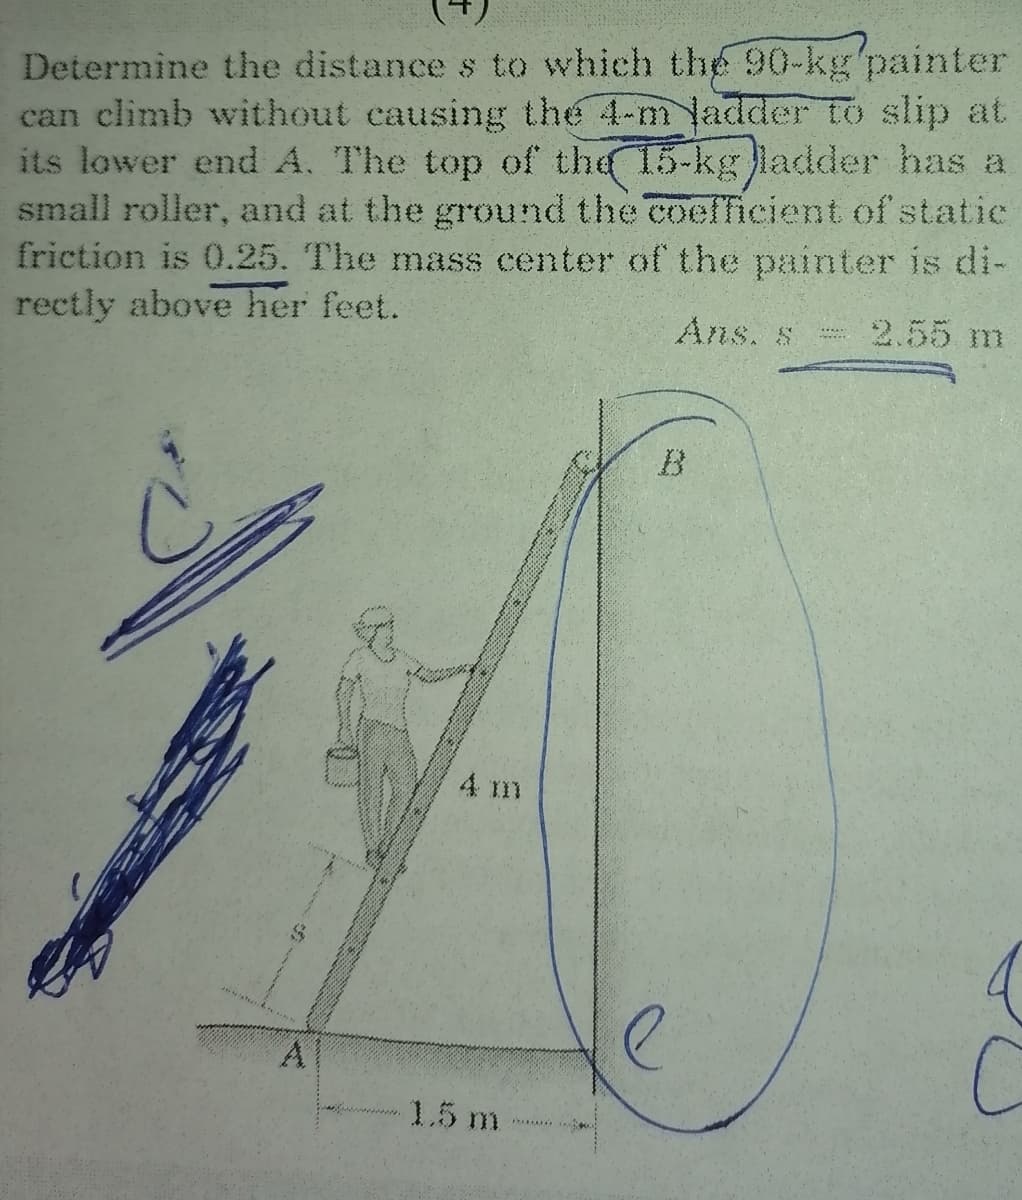 Determine the distance s to which the 90-kg'painter
can climb without causing the 4-m ladder to slip at
its lower end A. The top of the 15-kg ladder has a
small roller, and at the ground the coefficient of statie
friction is 0.25. The mass center of the painter is di-
rectly above her feet.
Ans. s
2.55 m
B
4 m
4
A
1.5 m
